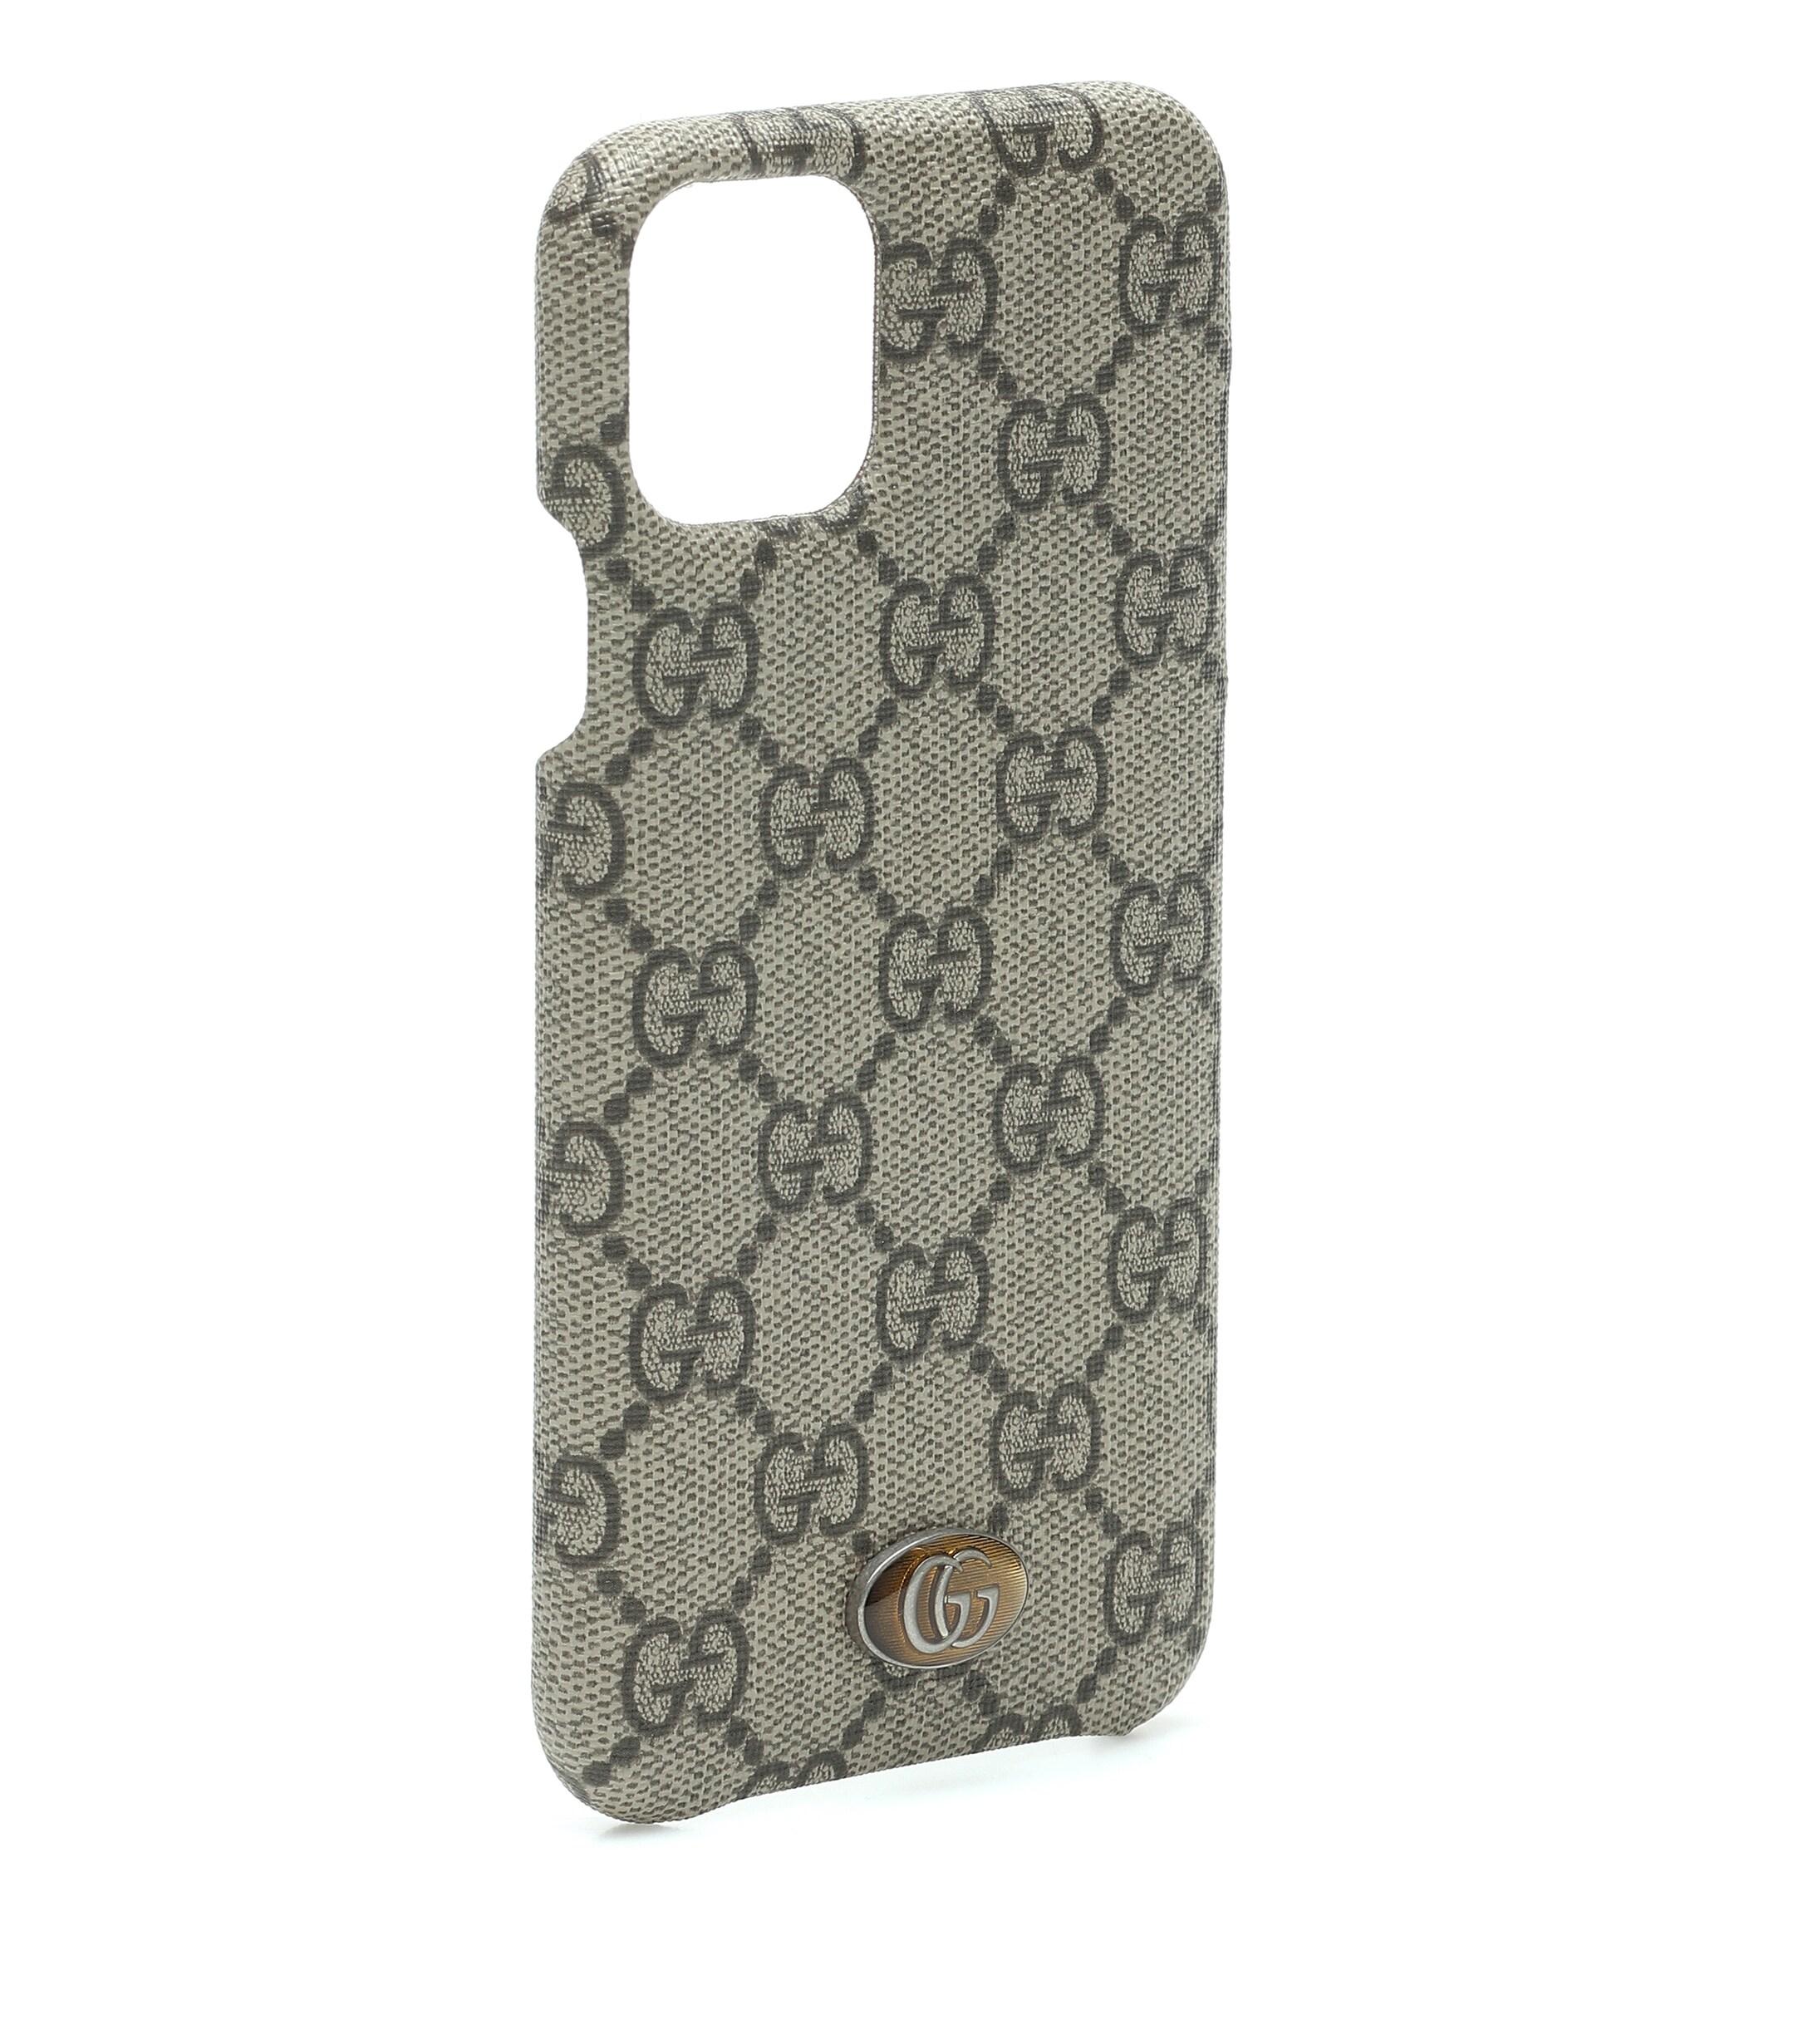 Gucci Canvas Ophidia Iphone 11 Pro Max Case in Beige (Natural) - Lyst